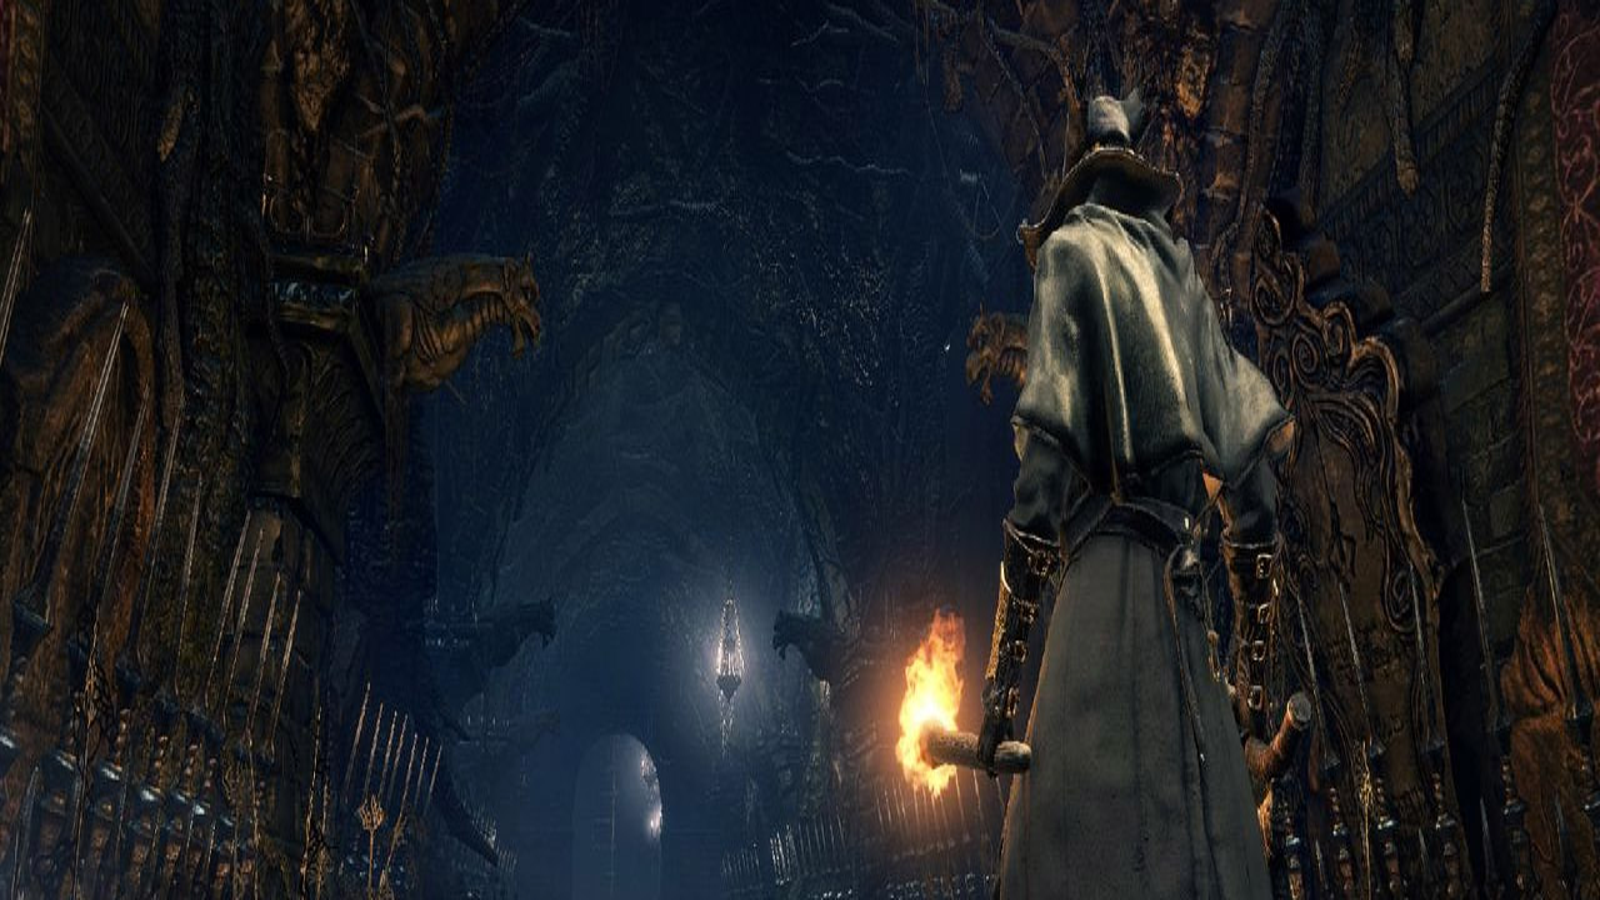 Bloodborne is the most-played Playstation Now game on PC, to absolutely no  one's surprise